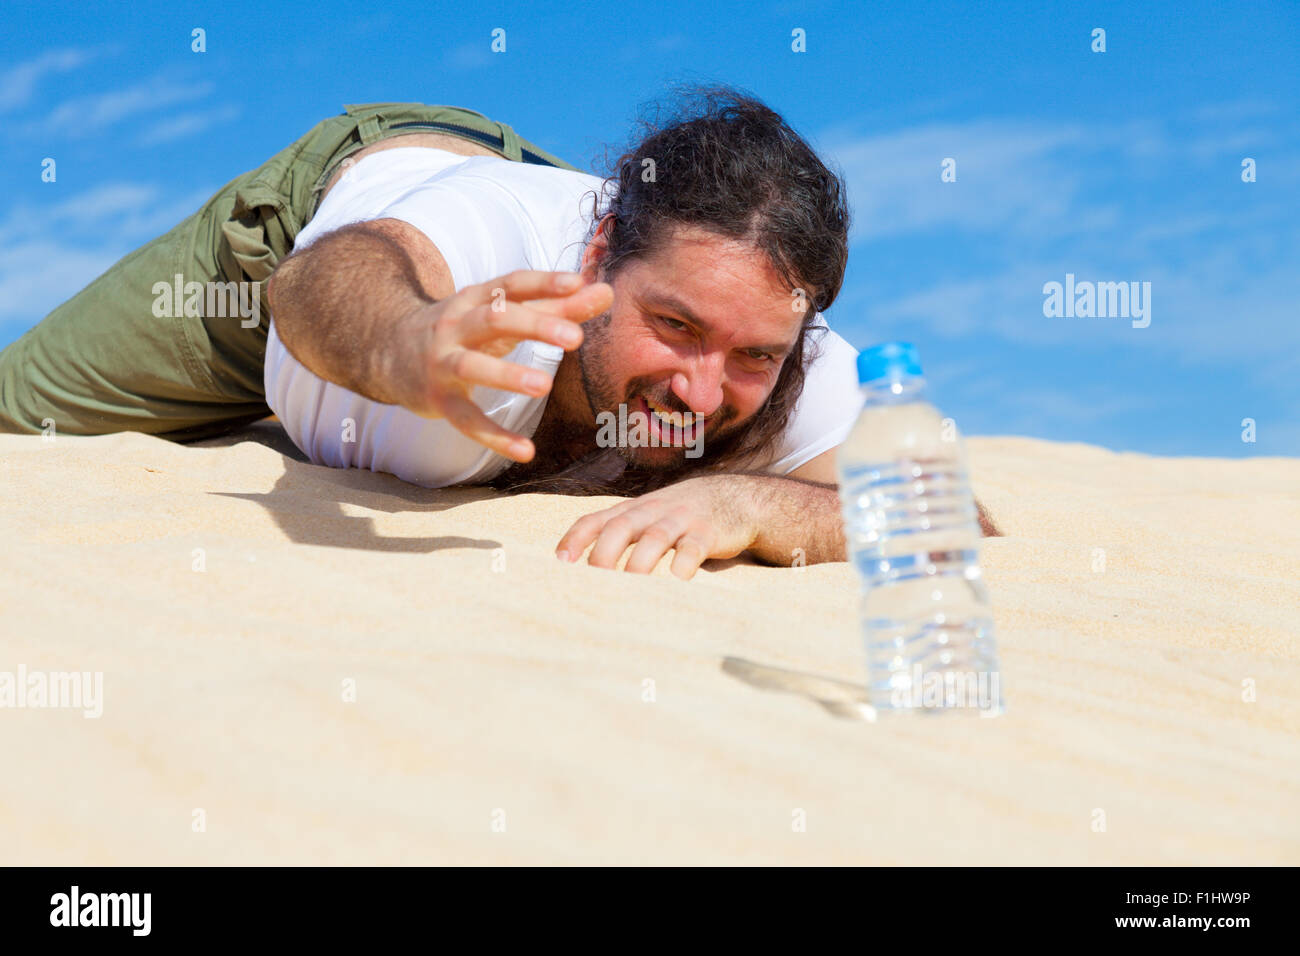 thirsty man reaches for a bottle of water in the empty Stock Photo